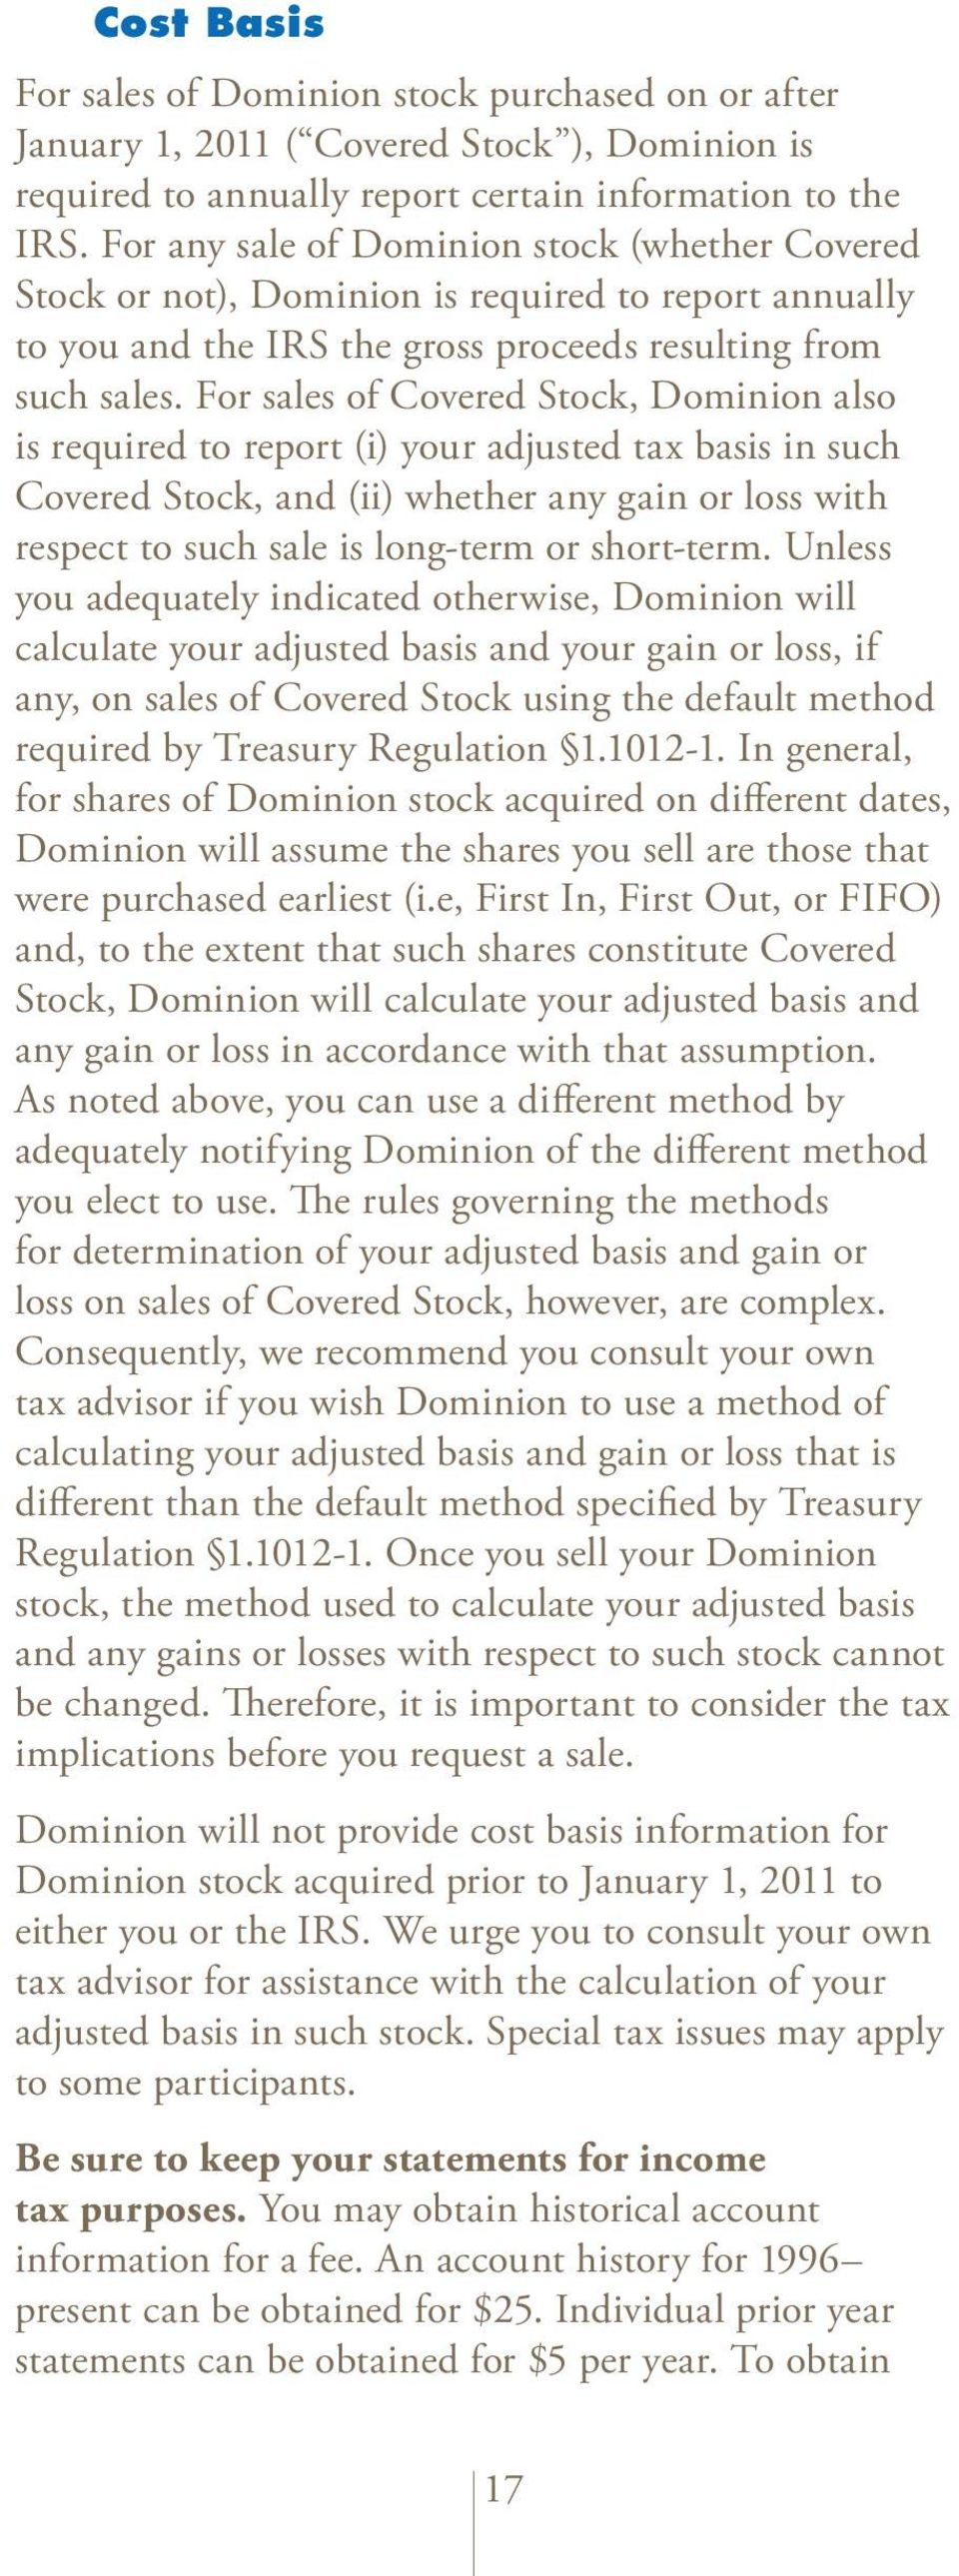 For sales of Covered Stock, Dominion also is required to report (i) your adjusted tax basis in such Covered Stock, and (ii) whether any gain or loss with respect to such sale is long-term or